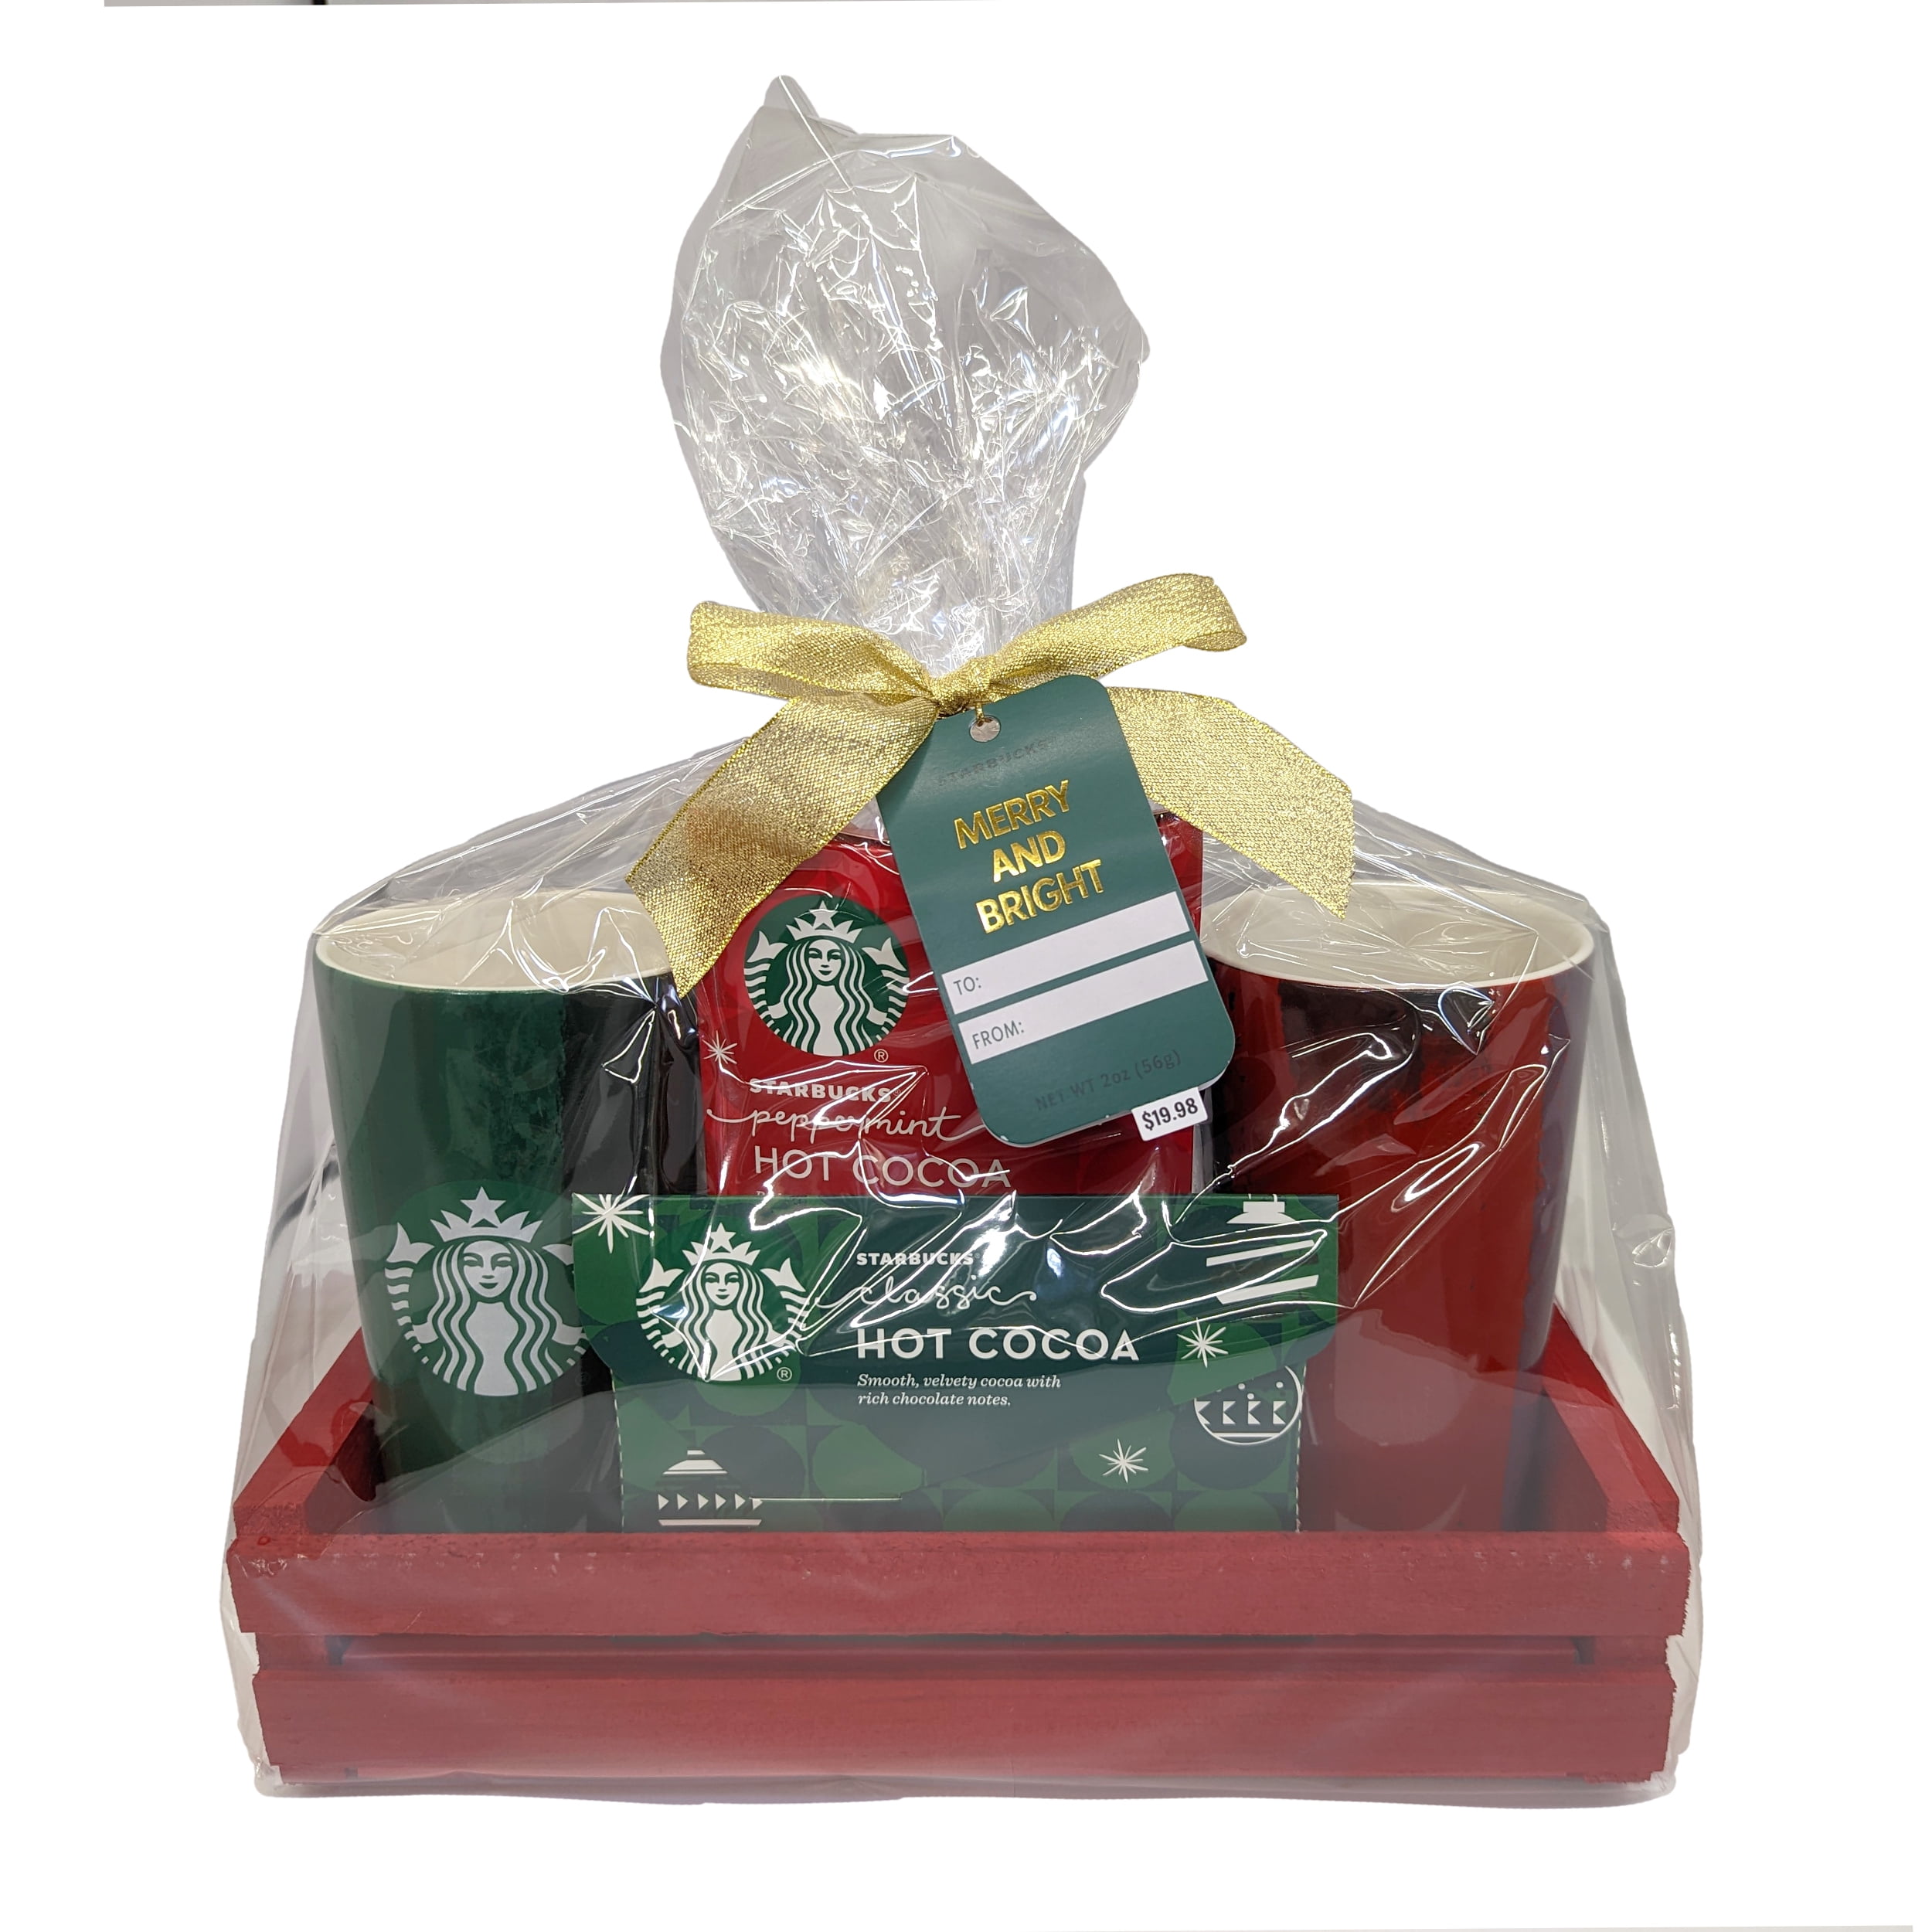 Starbucks Extravaganza: Deluxe Coffee Gift Basket at Gift Baskets Etc